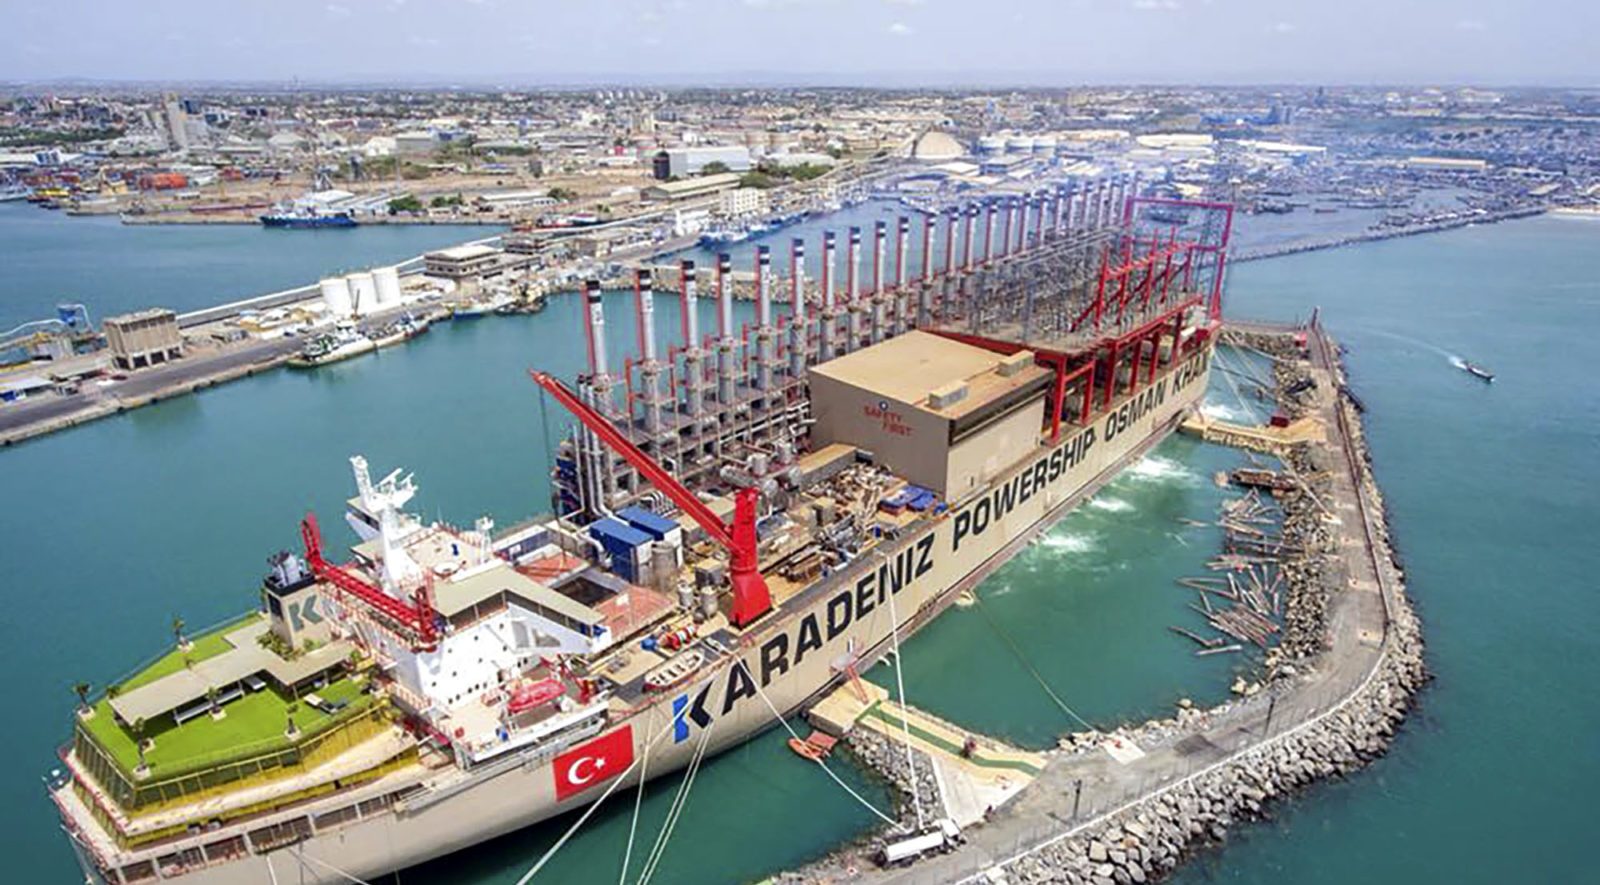 Turkish Karpowership vows to provide Energy solution to South Africa